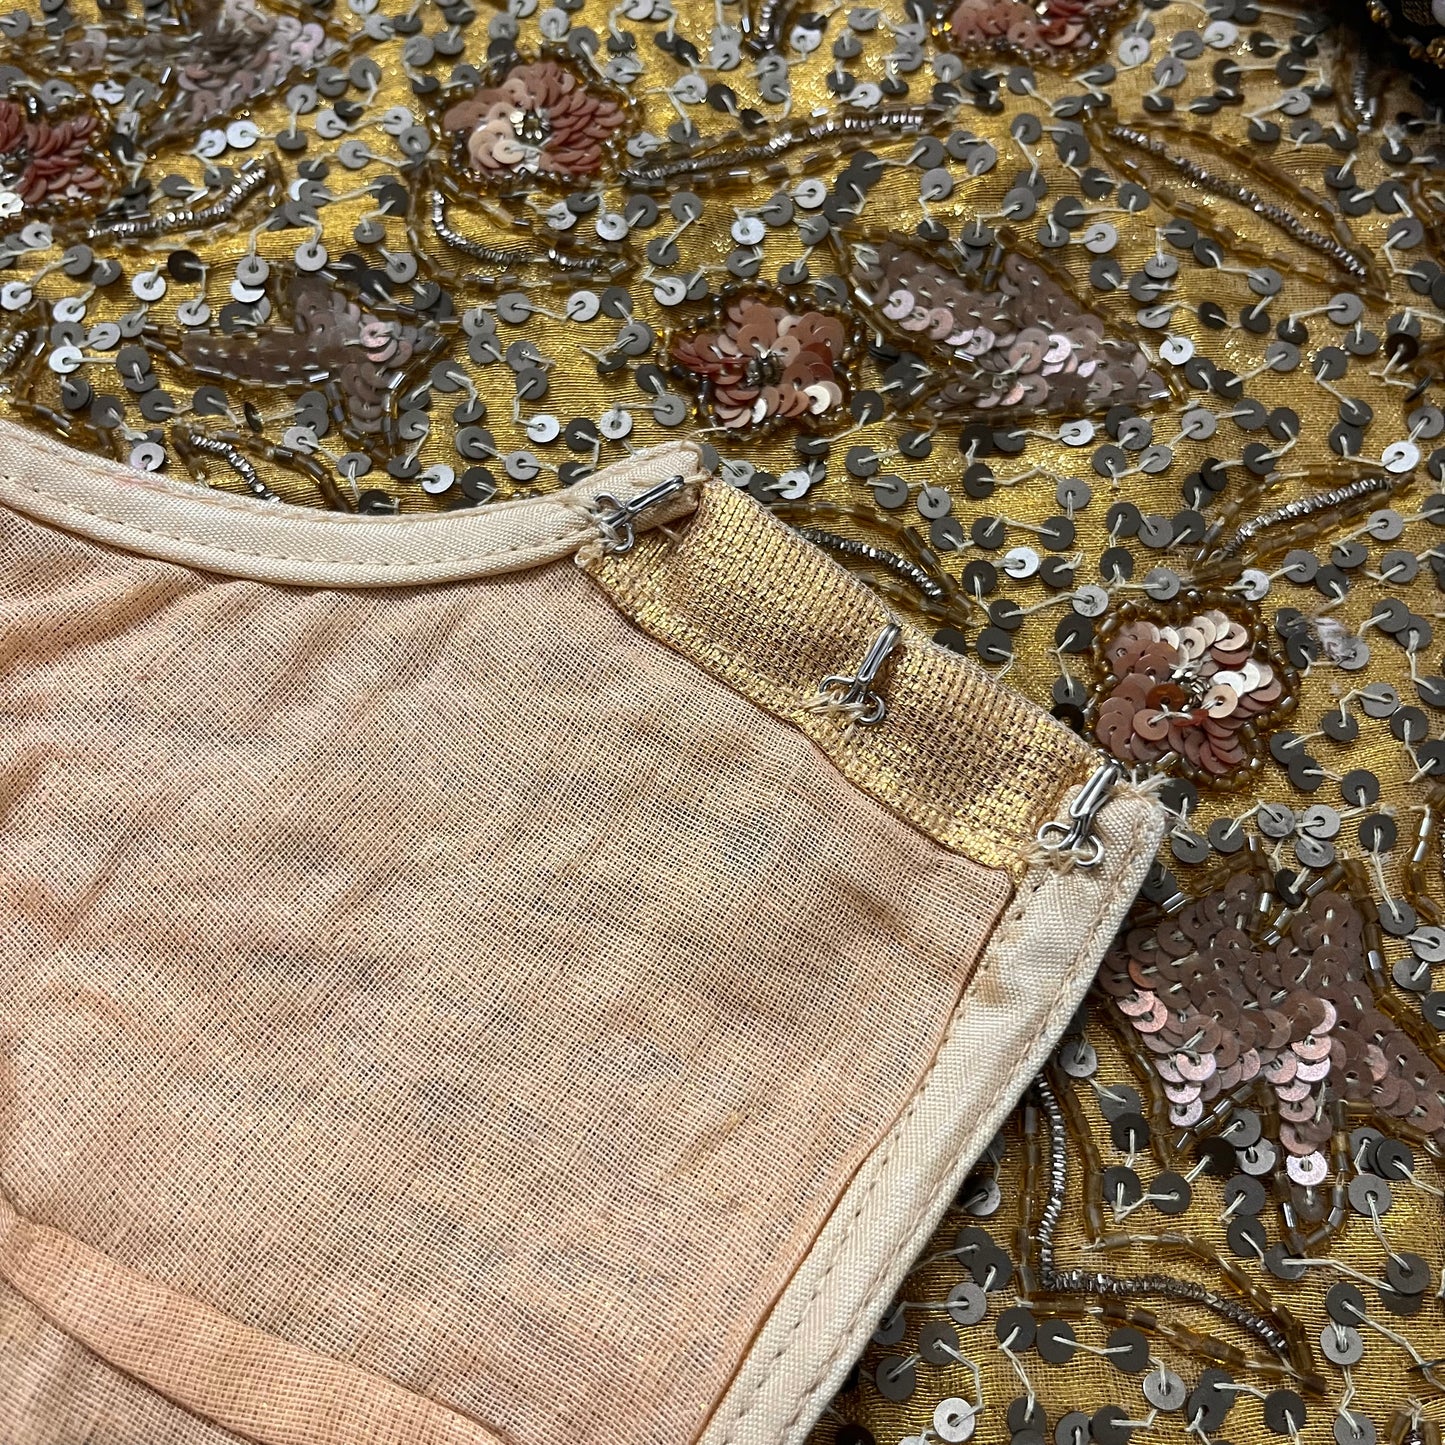 Beige gold stitched blouse with mirror work